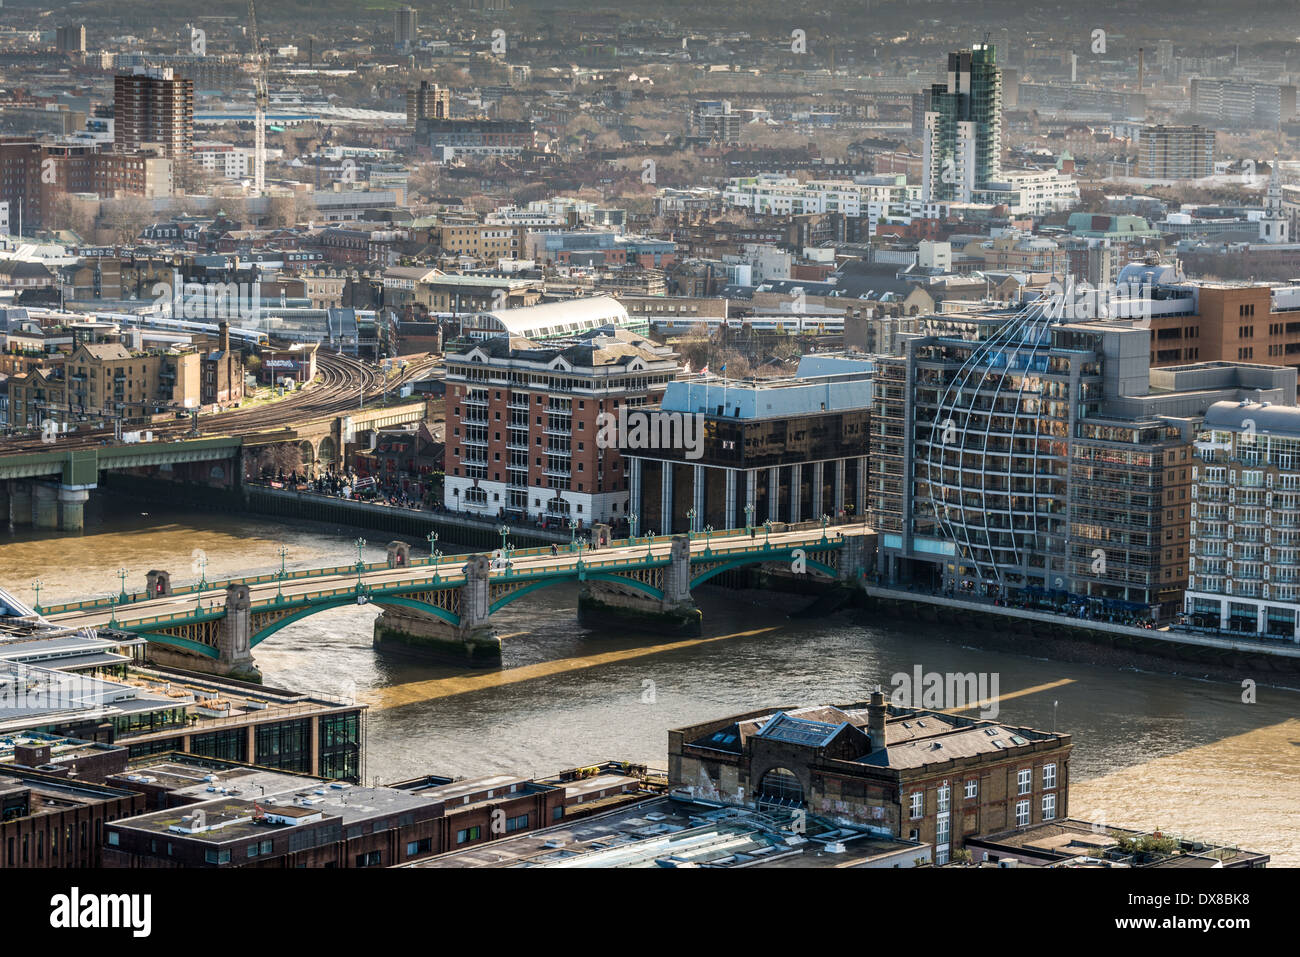 Looking to South East London over Southwark Bridge Cannon Street Railway Bridge spanning the River Thames Stock Photo